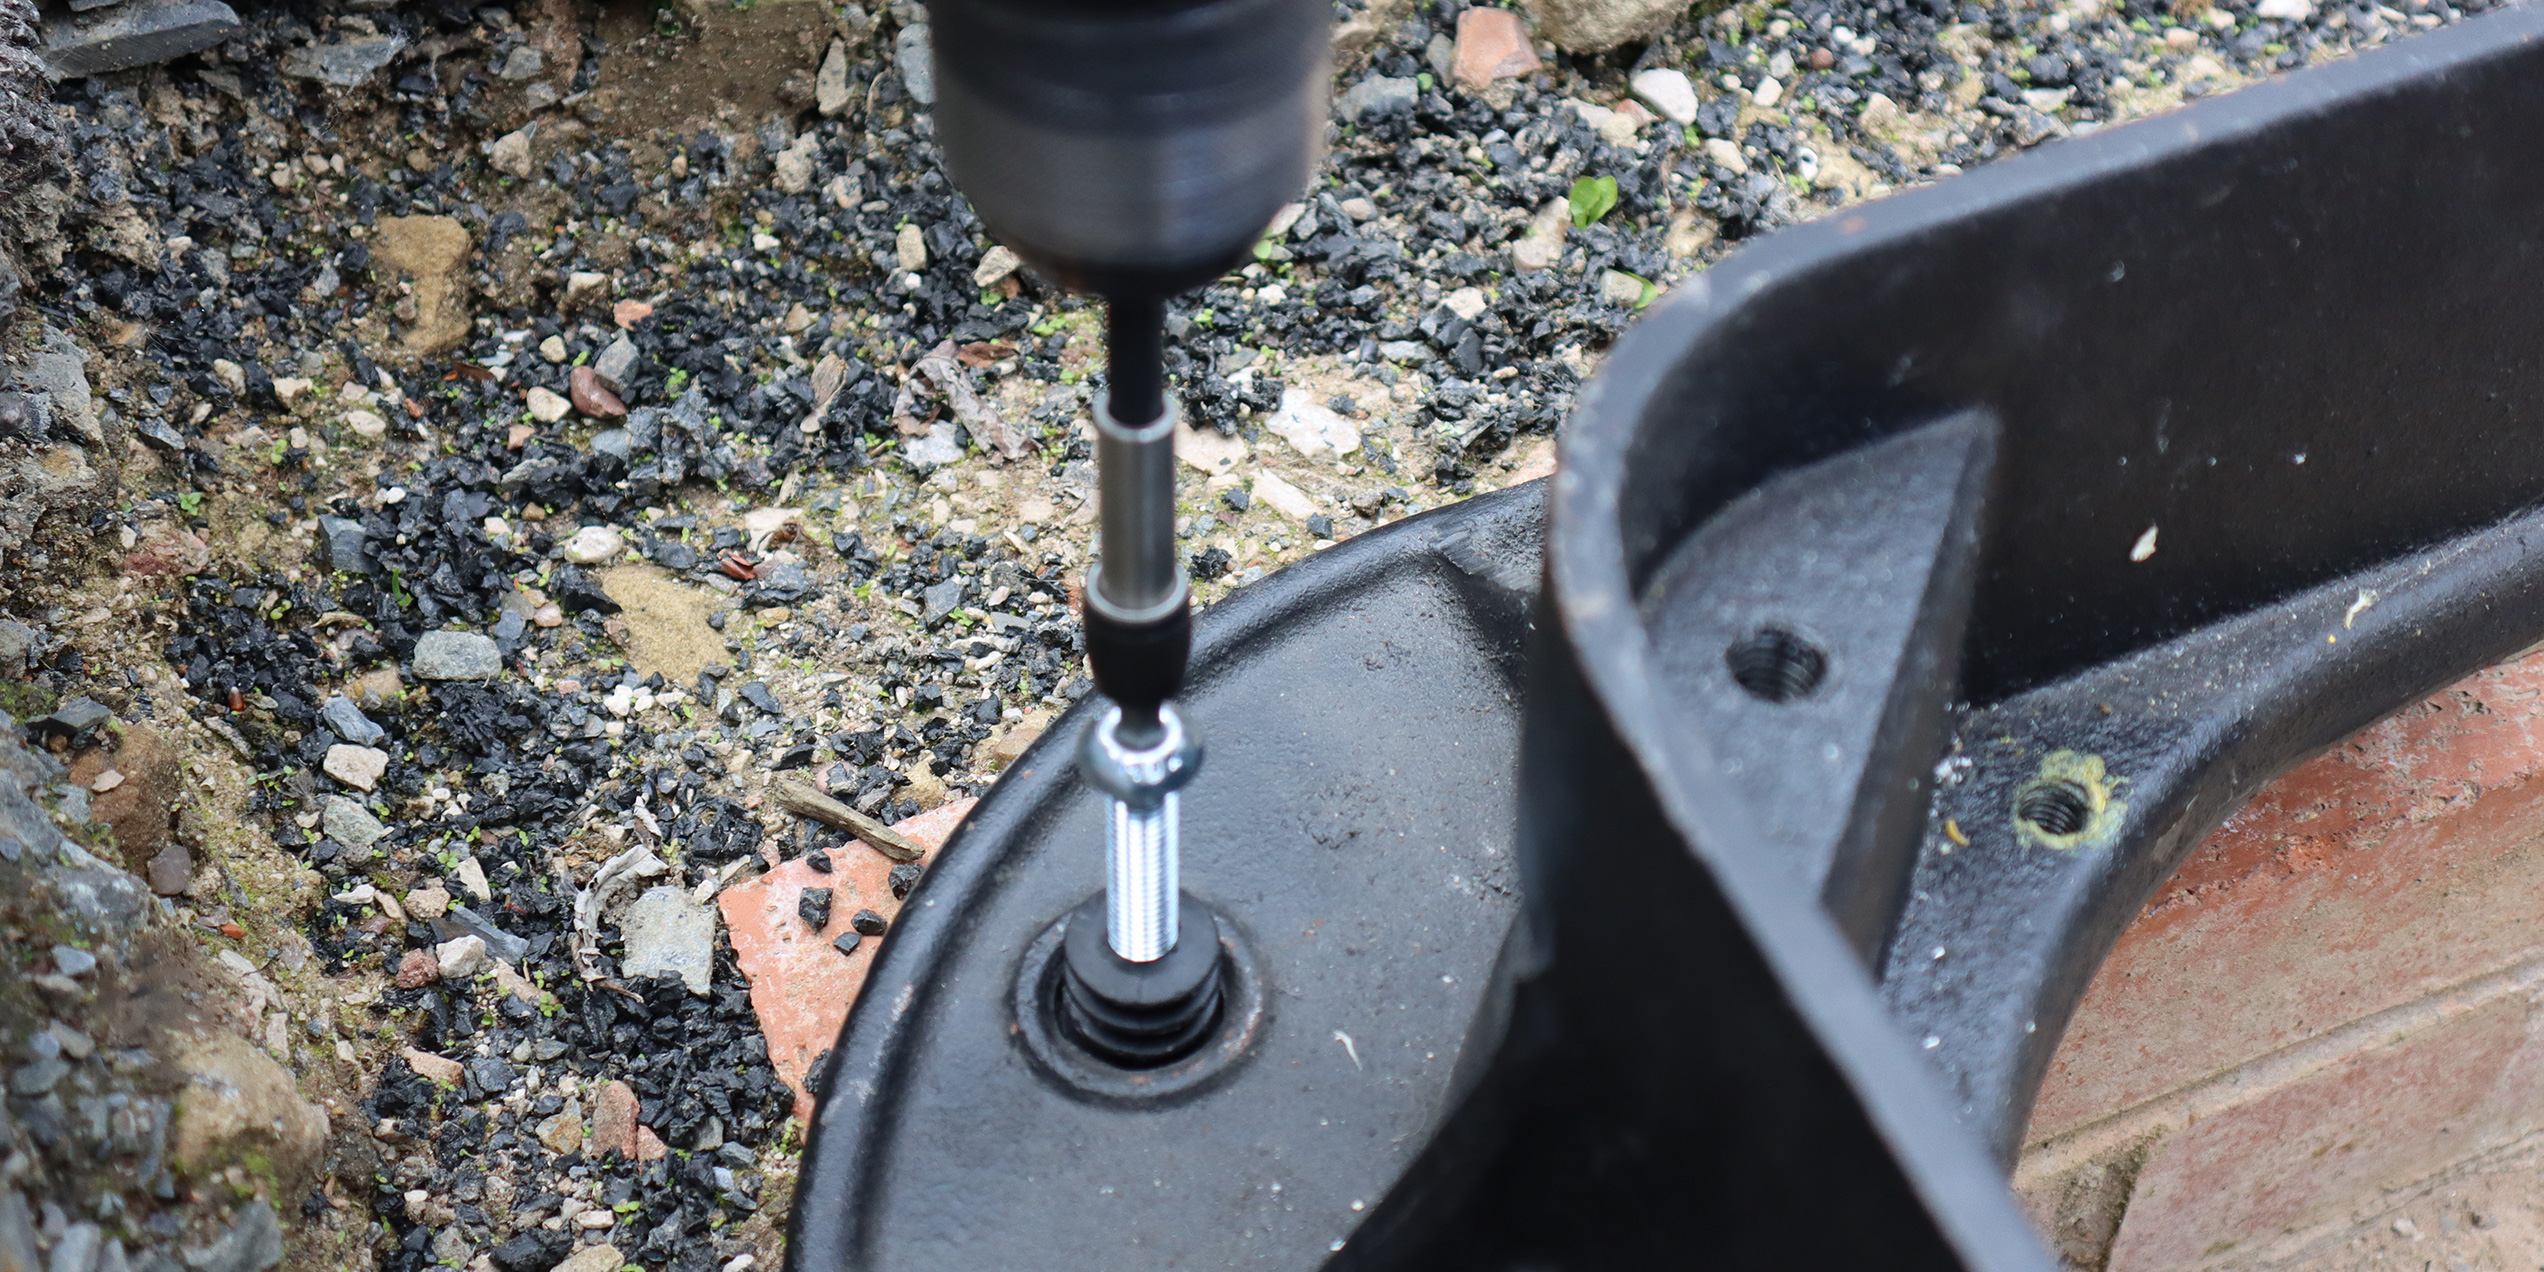 Insert bolt and screw to raise manhole cover frame into position